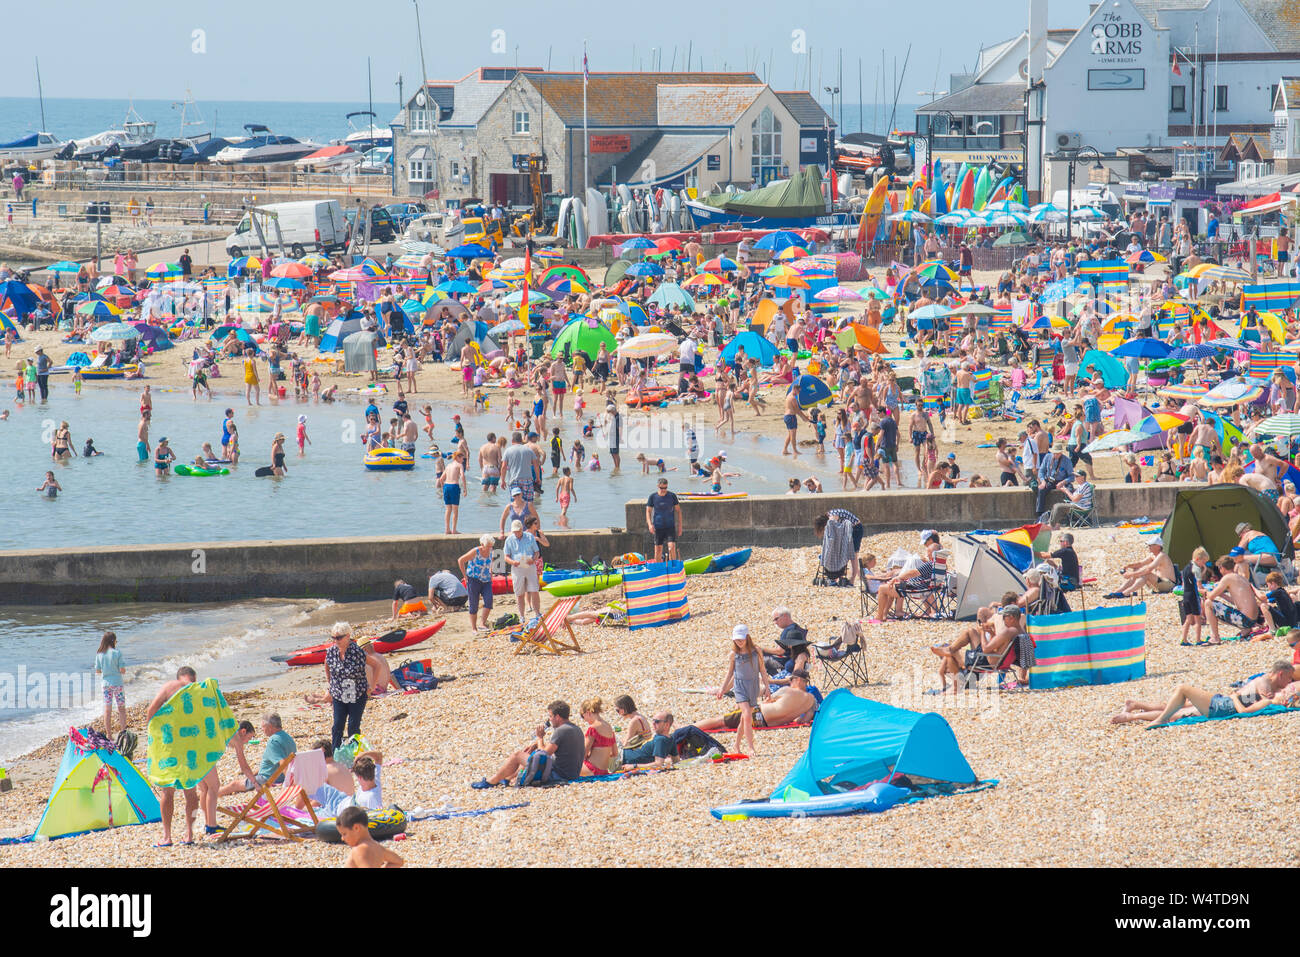 Lyme Regis, Dorset, UK. 25th July 2019. UK Weather: Crowds of sunskeekers swelter in record breaking heat on the beach at the seaside resort of Lyme Regis on what is expected to be the hottest day in the UK ever.  British holidaymakers swelter in sizzling hot sunshine on the town's packed beach as temperatures soar towards 40 degrees centigrade.  The cooling sea is welcome relief from the searing heat as the July heatwave continues. Credit: Celia McMahon/Alamy Live News. Stock Photo